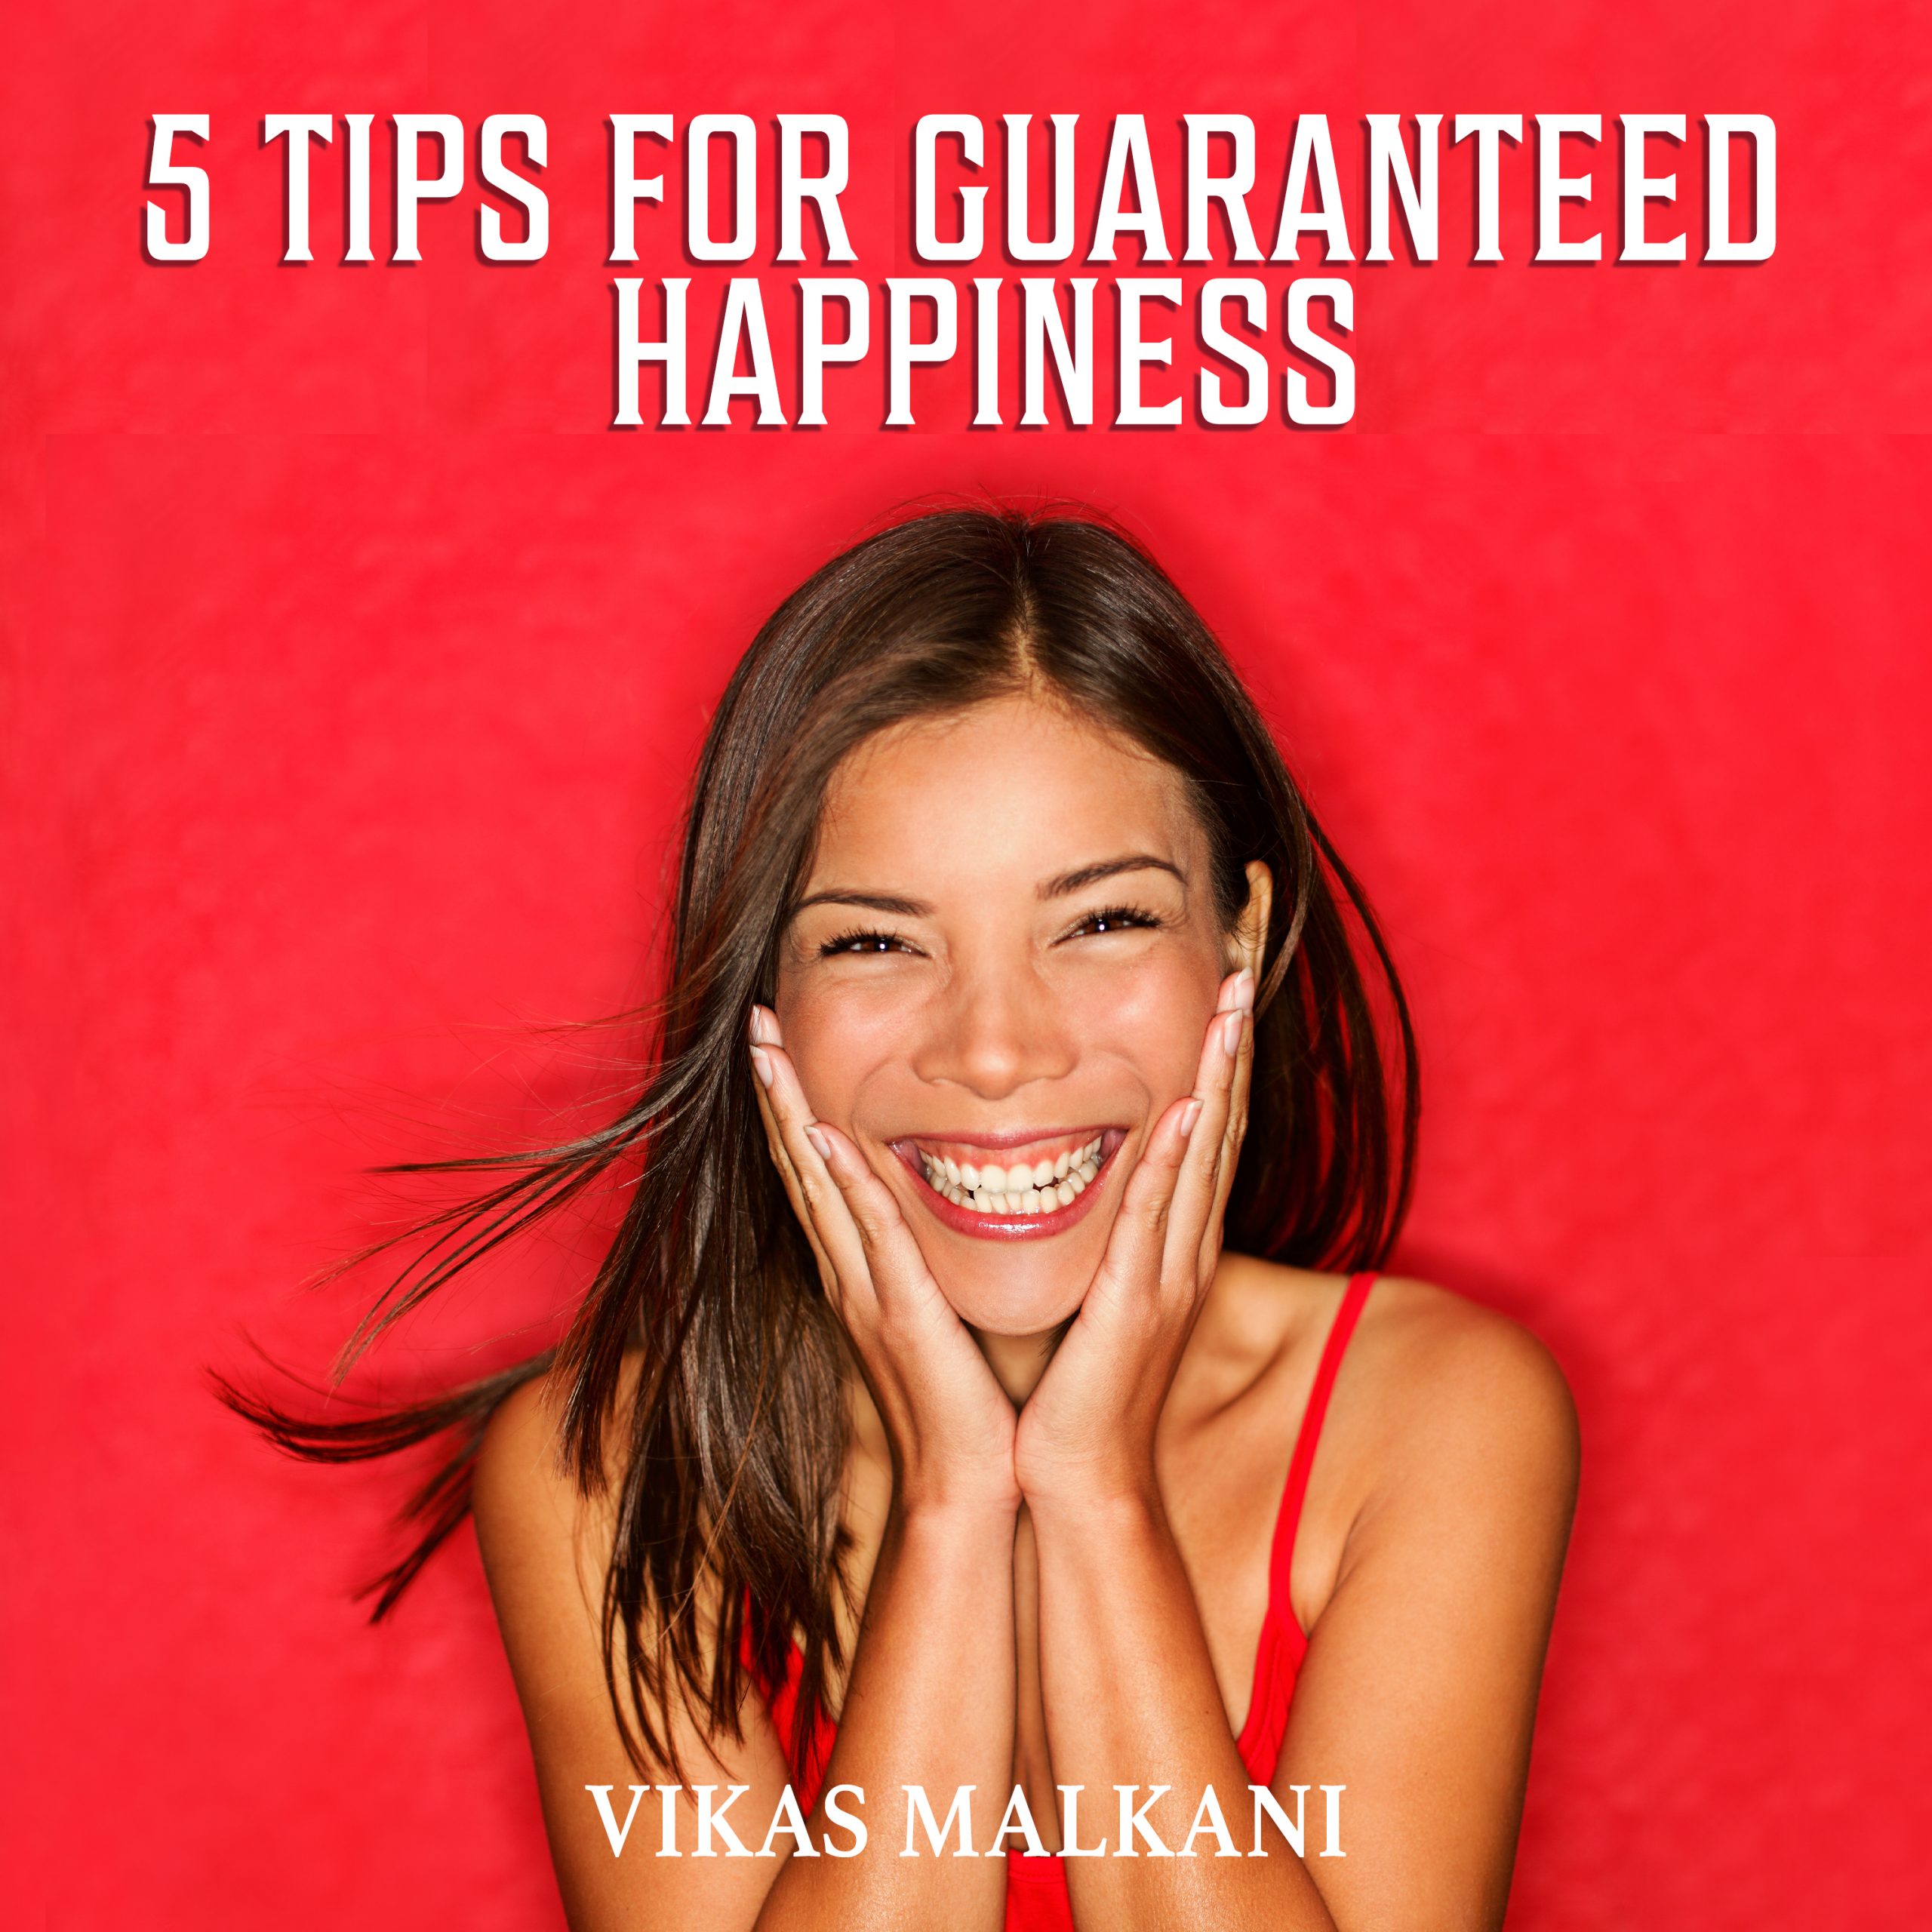 5 Top Tips for Guaranteed Happiness